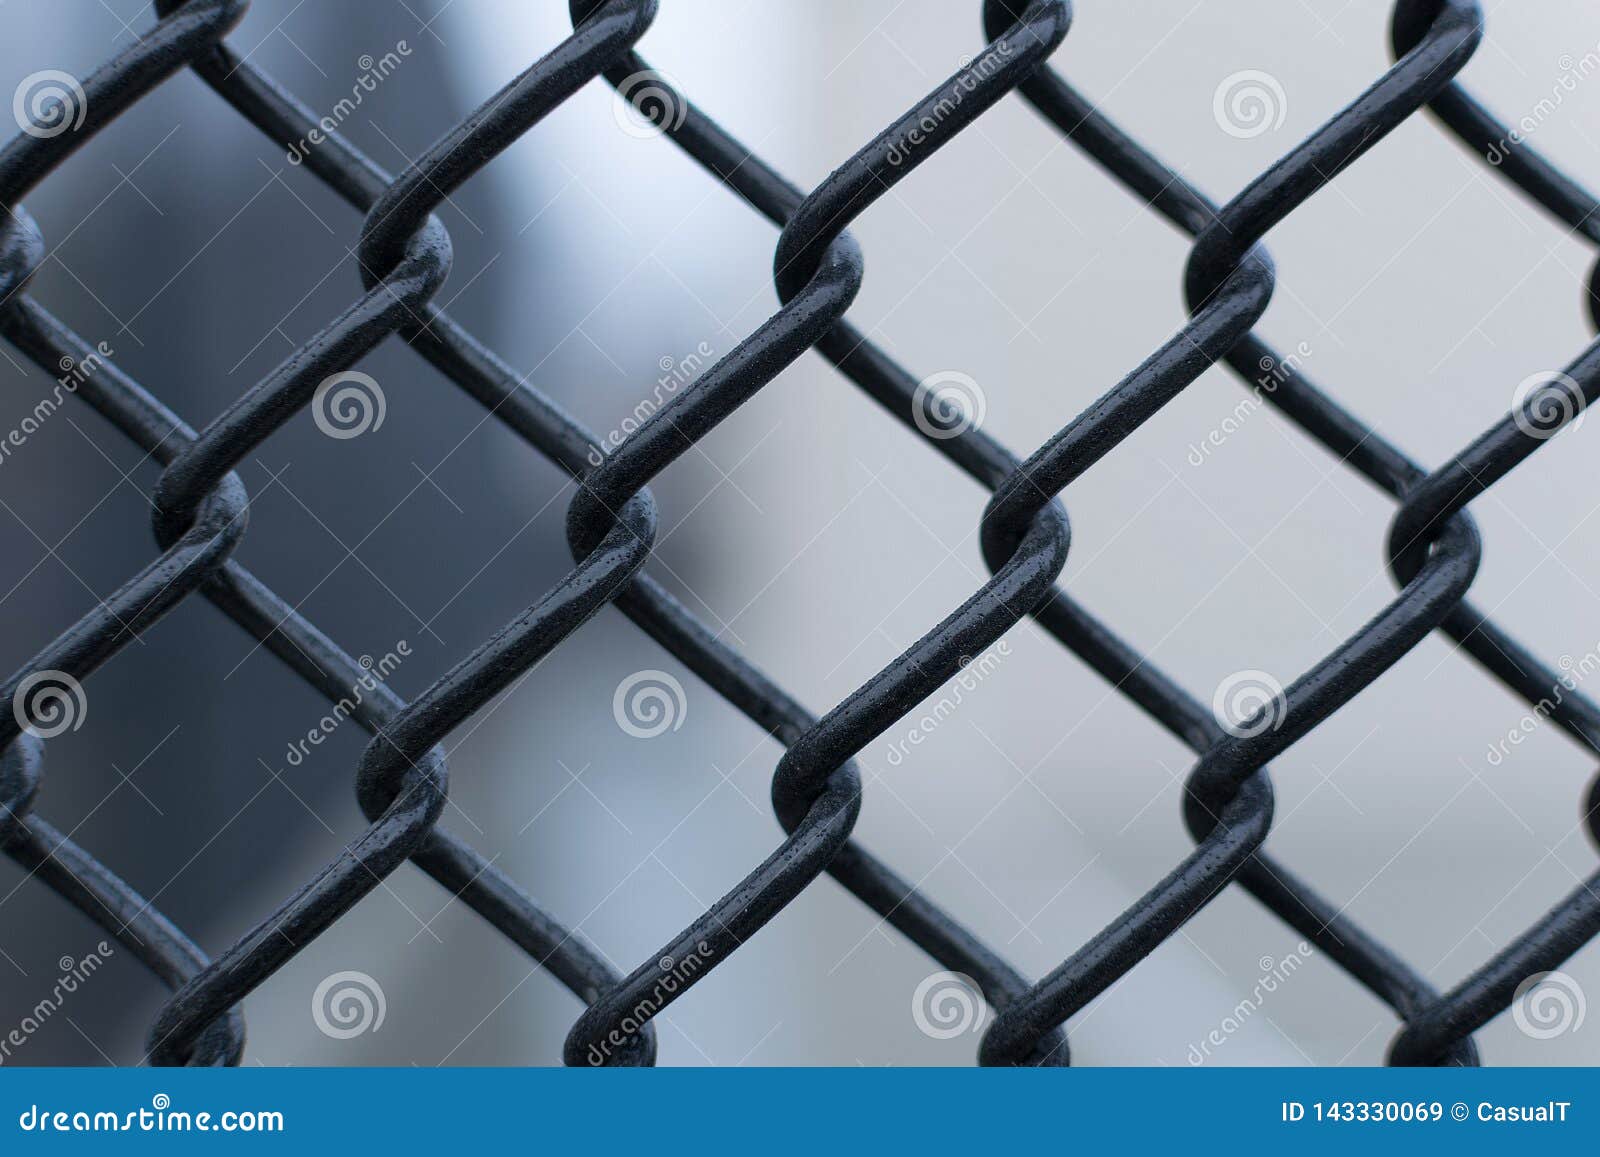 Black Chain Link Fence Against A Smooth Blurred Out Background, Closeup ...
